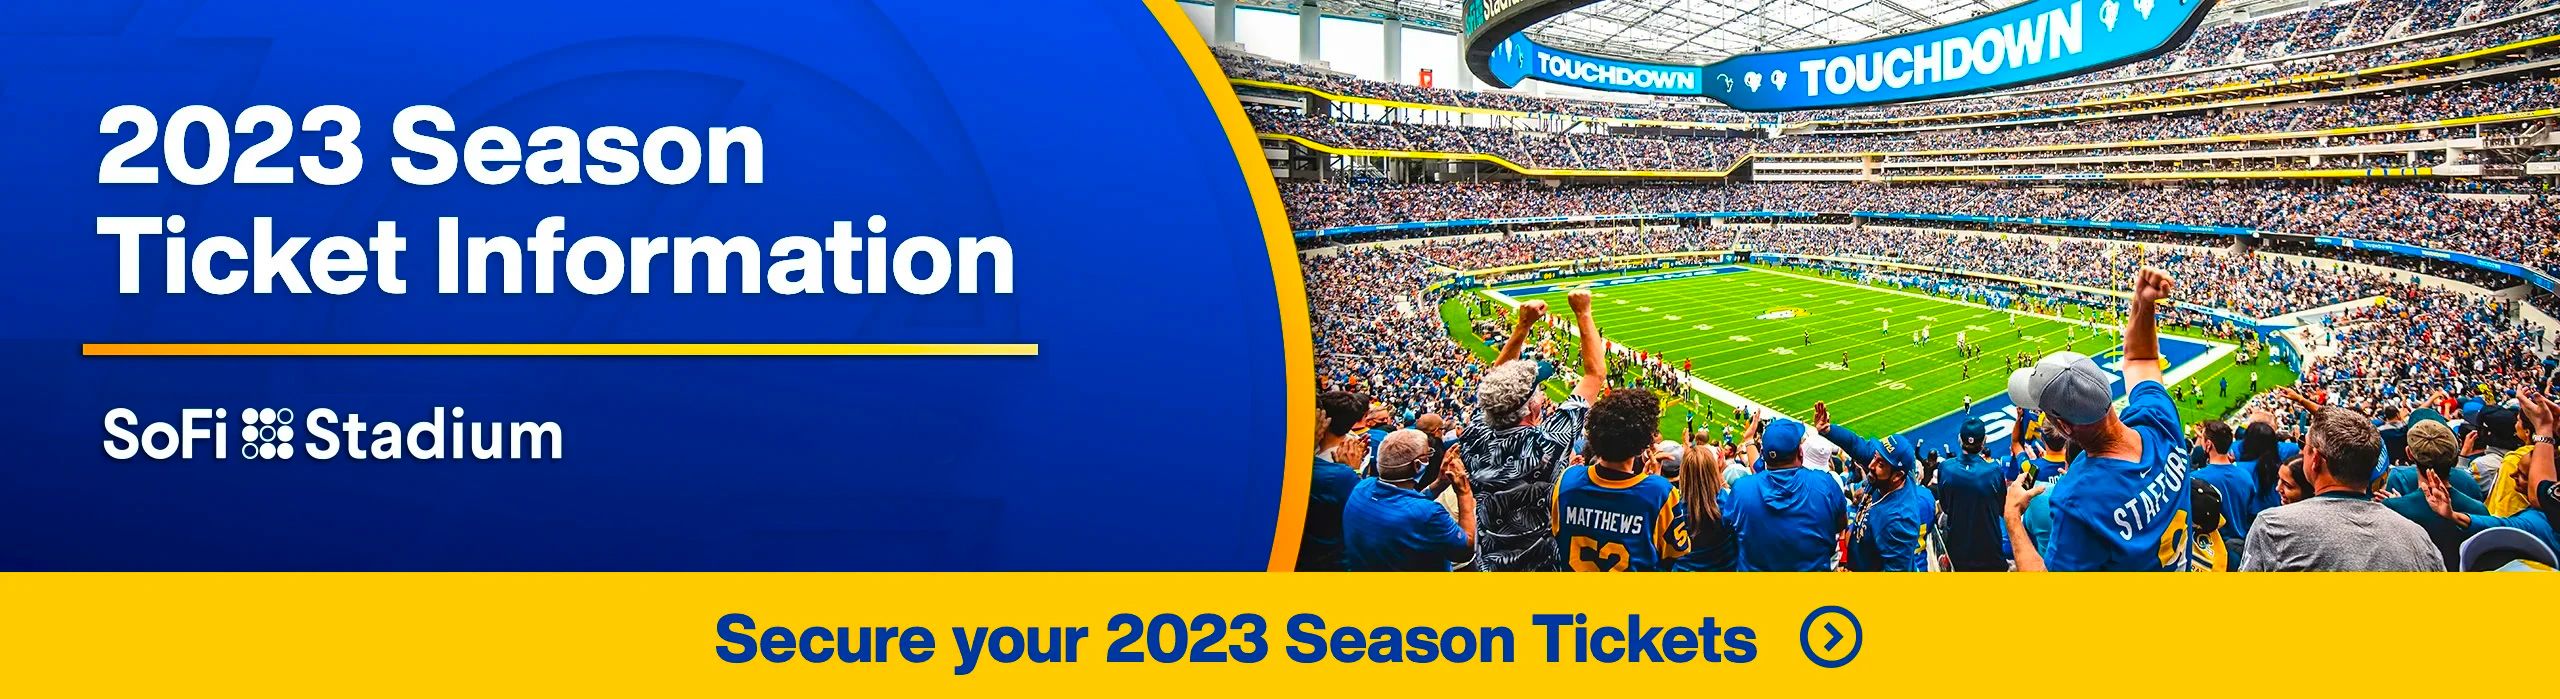 rams tickets price 2021